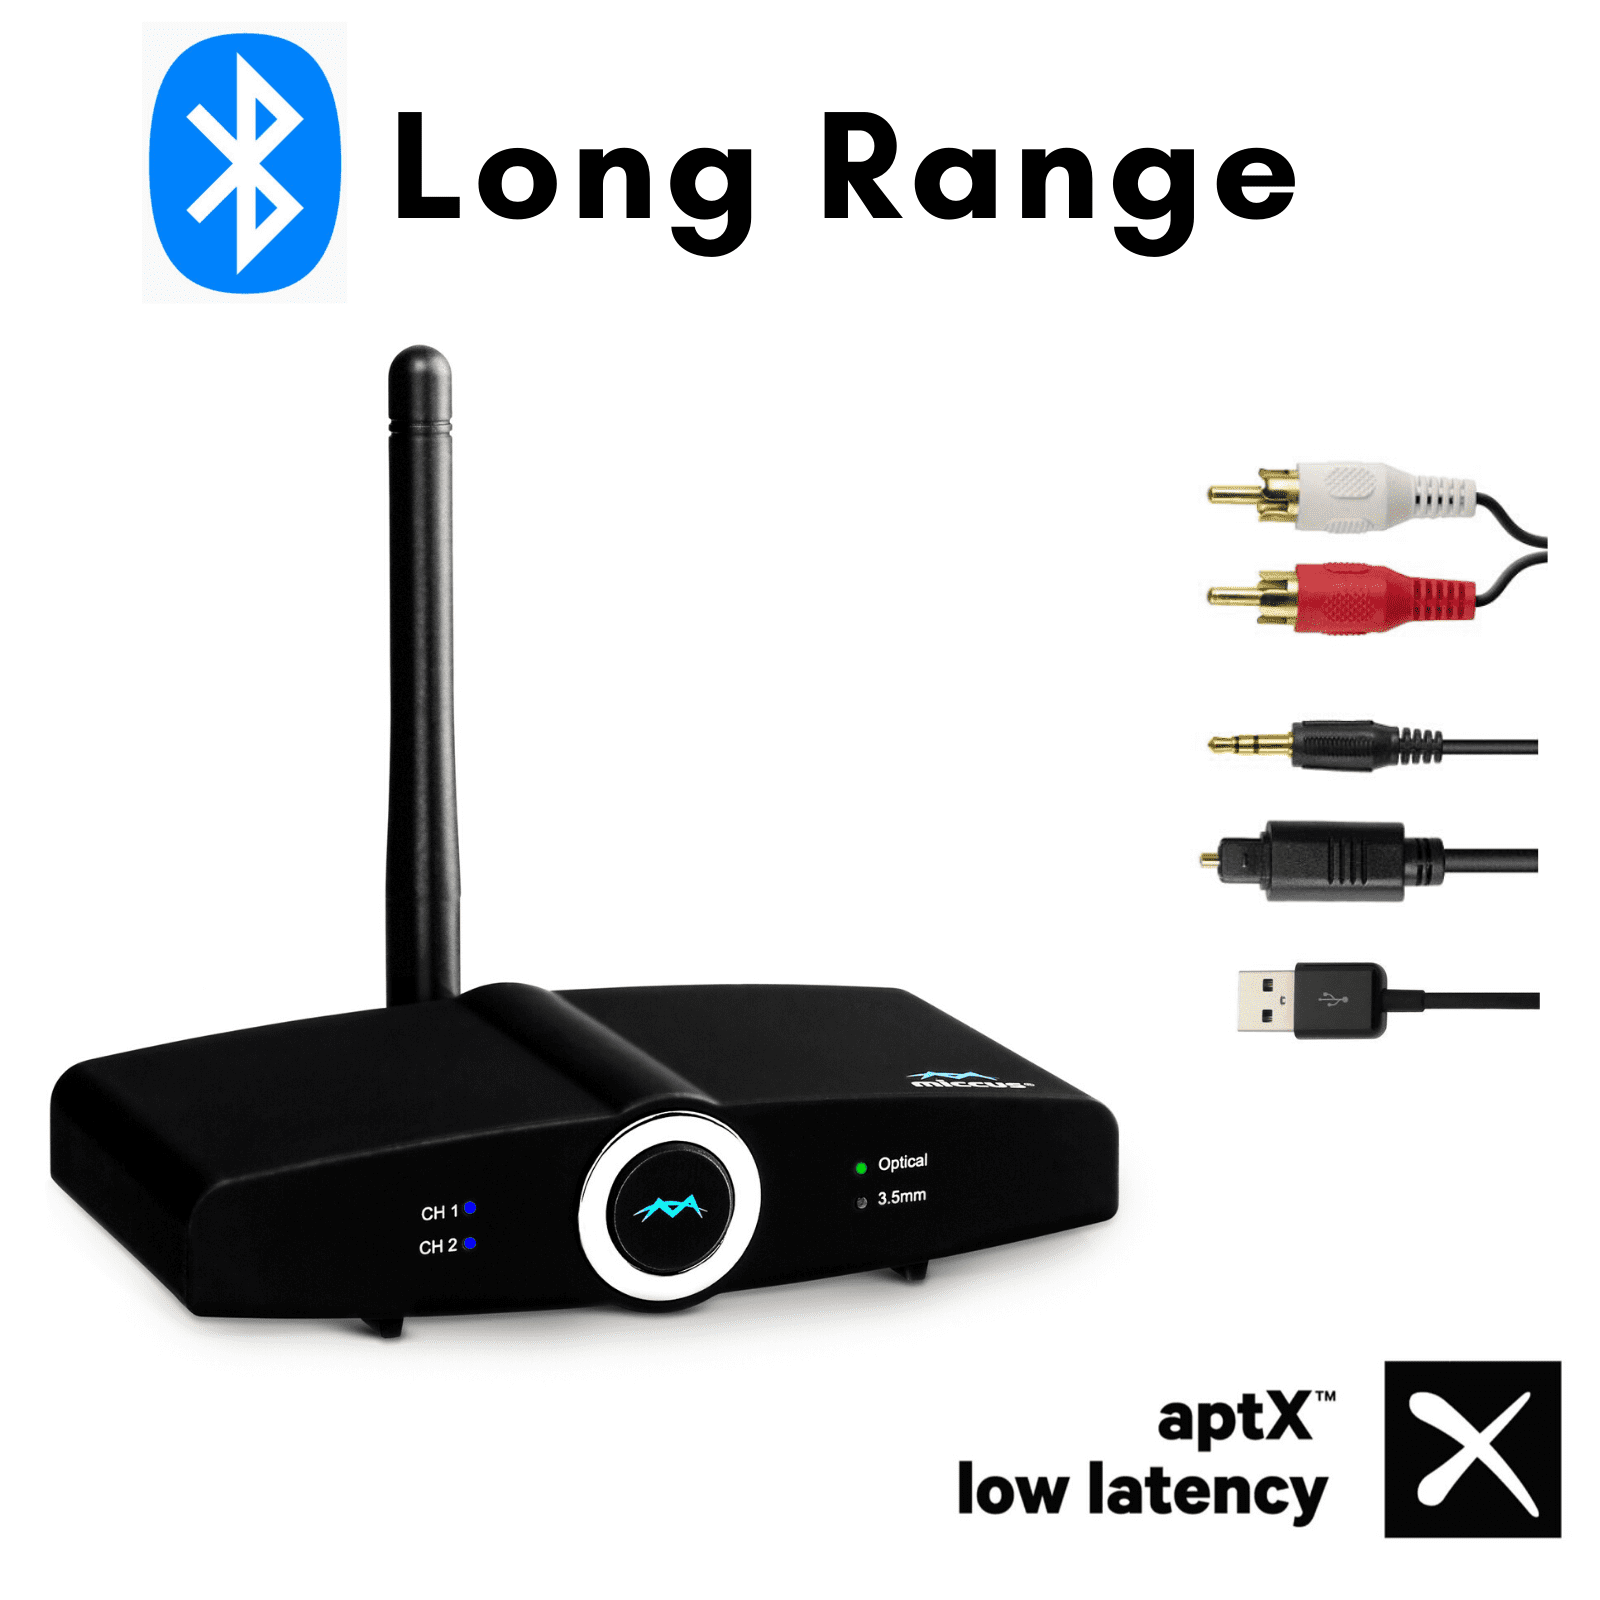 AptX Low Latency, Pair with 2 Bluetooth Devices Simultaneously 2-in-1 Wireless Adapter with 3.5mm AUX Stereo Output for PC/TV/Vehicle/Home Sound System MTY Bluetooth Transmitter Receiver Black 